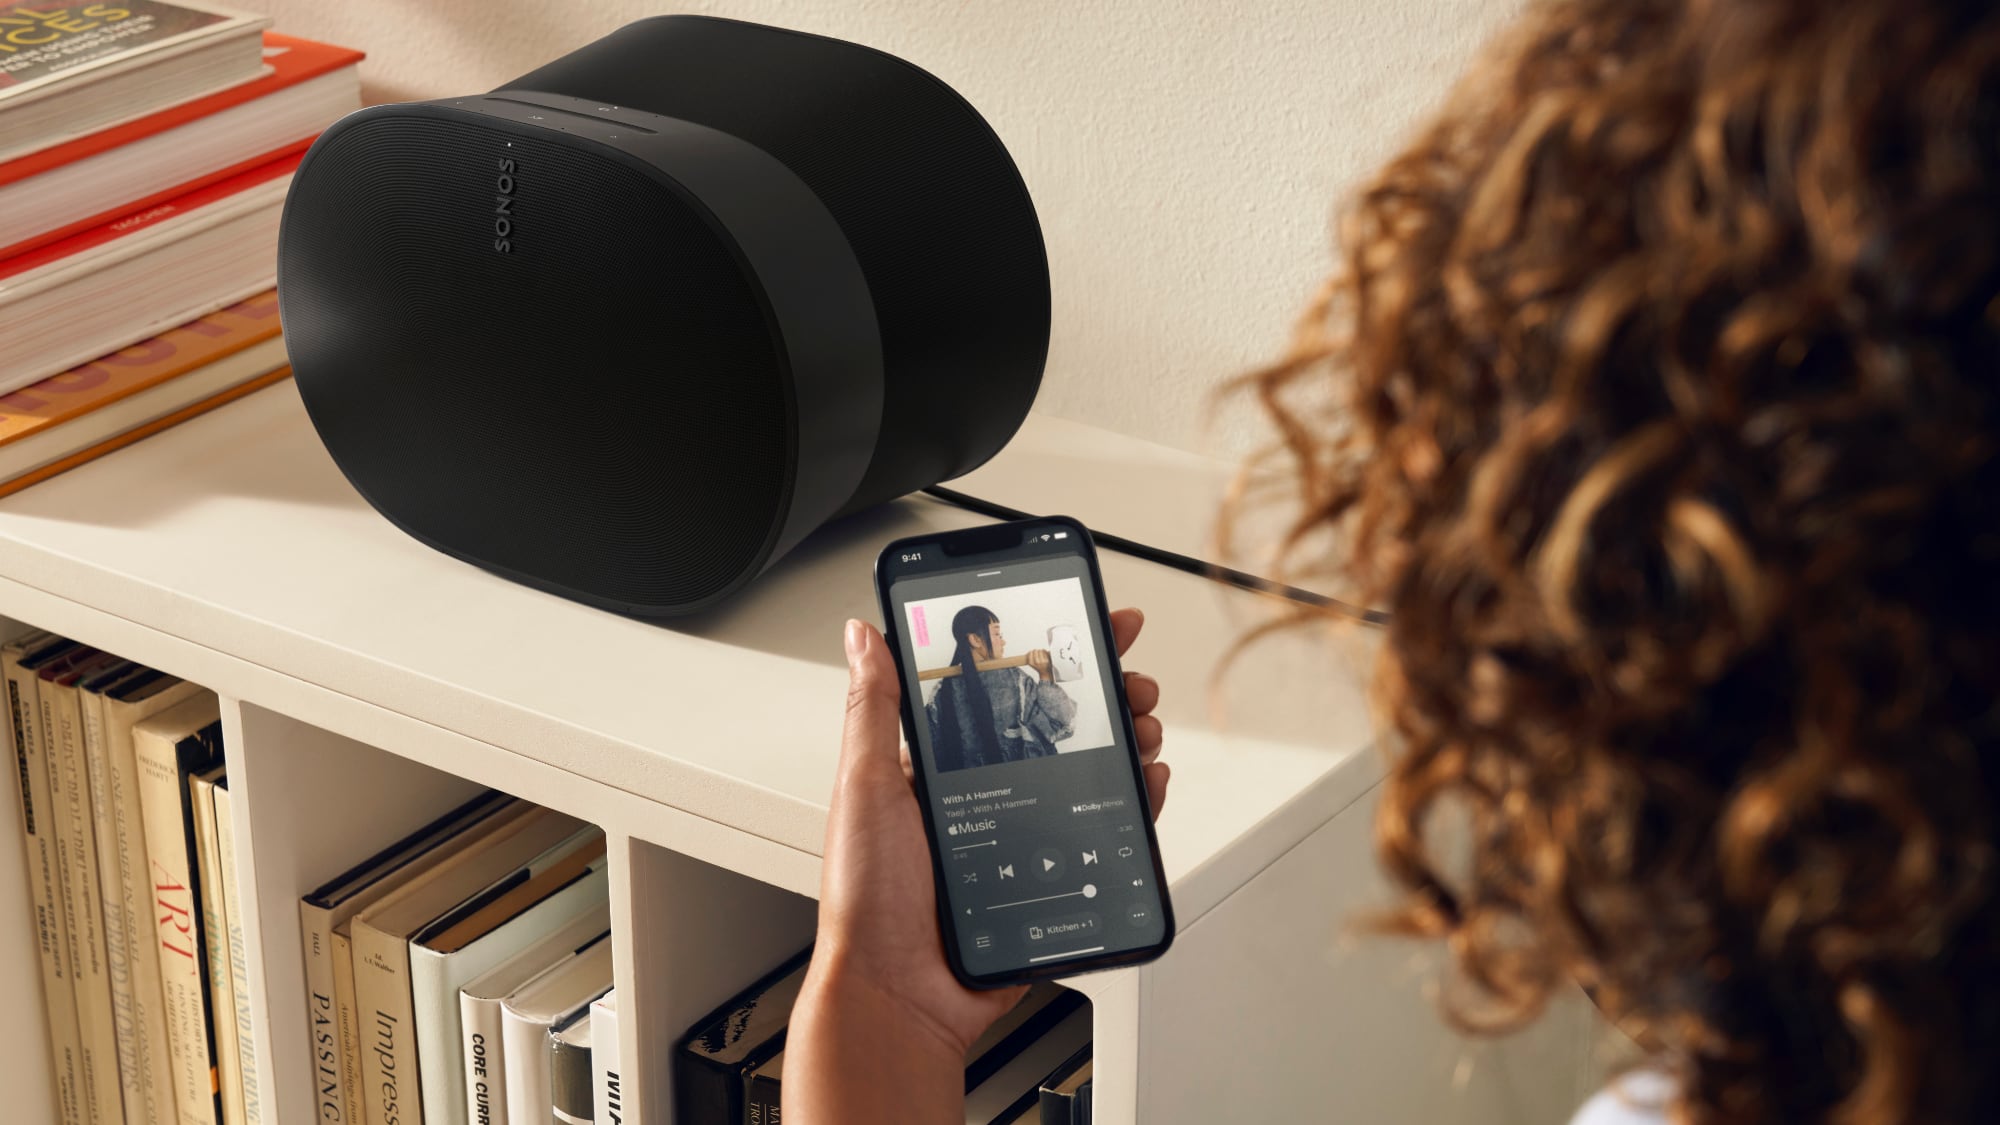 Sonos Said Rolling Out Widely Criticized App Redesign Took ‘Courage’